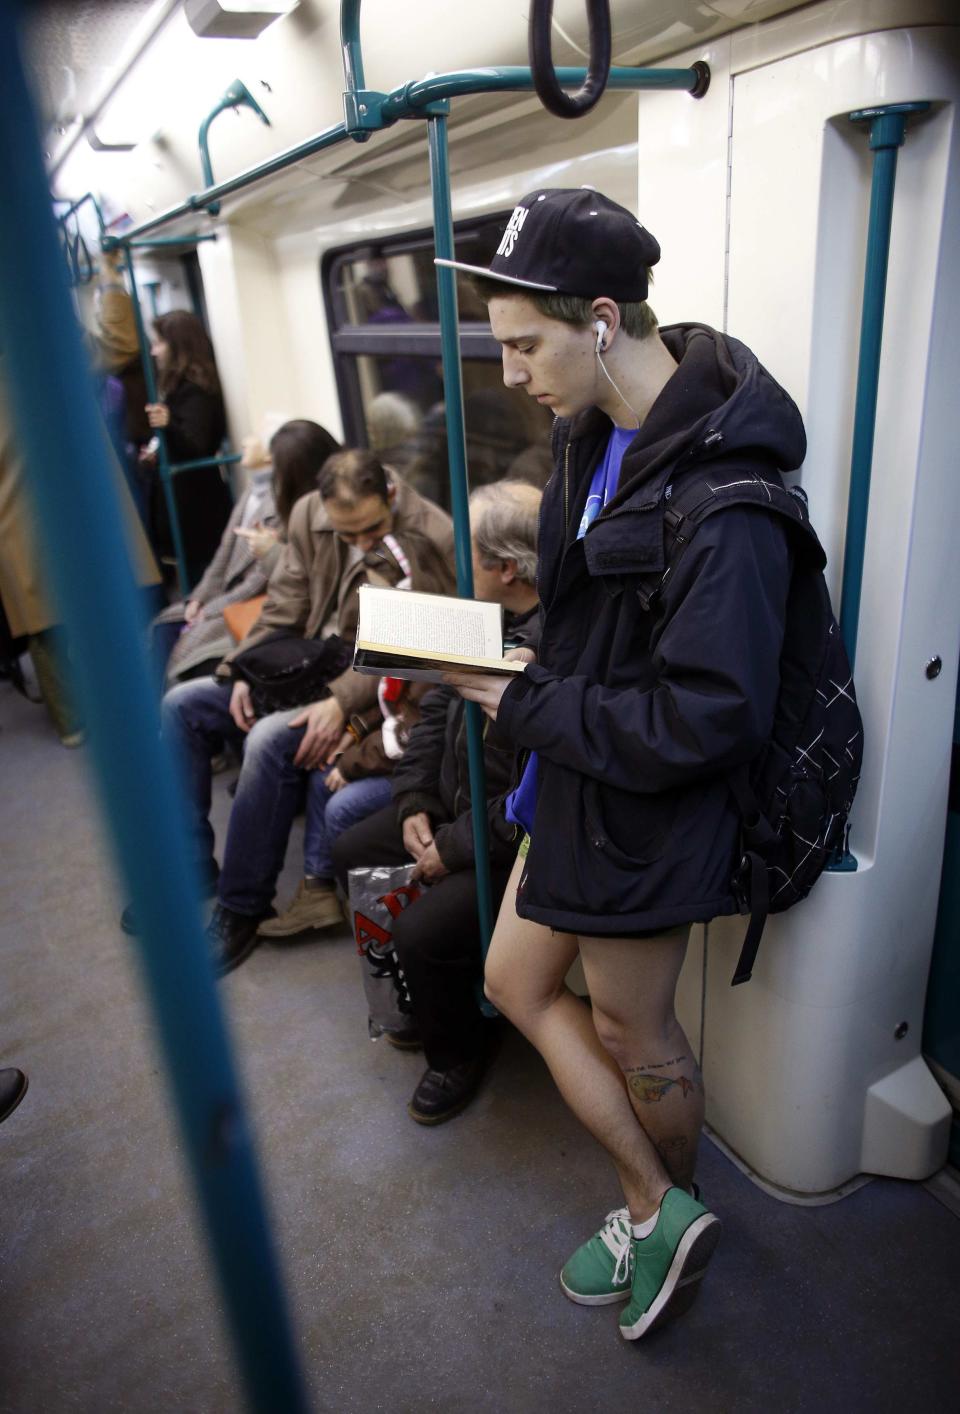 A passenger without his pants reads a book as he uses a subway train during the "No Pants Subway Ride" event in Sofia January 12, 2014. The event is an annual flash mob and occurs in different cities around the world, according to its organisers. REUTERS/Stoyan Nenov (BULGARIA - Tags: SOCIETY ENTERTAINMENT)